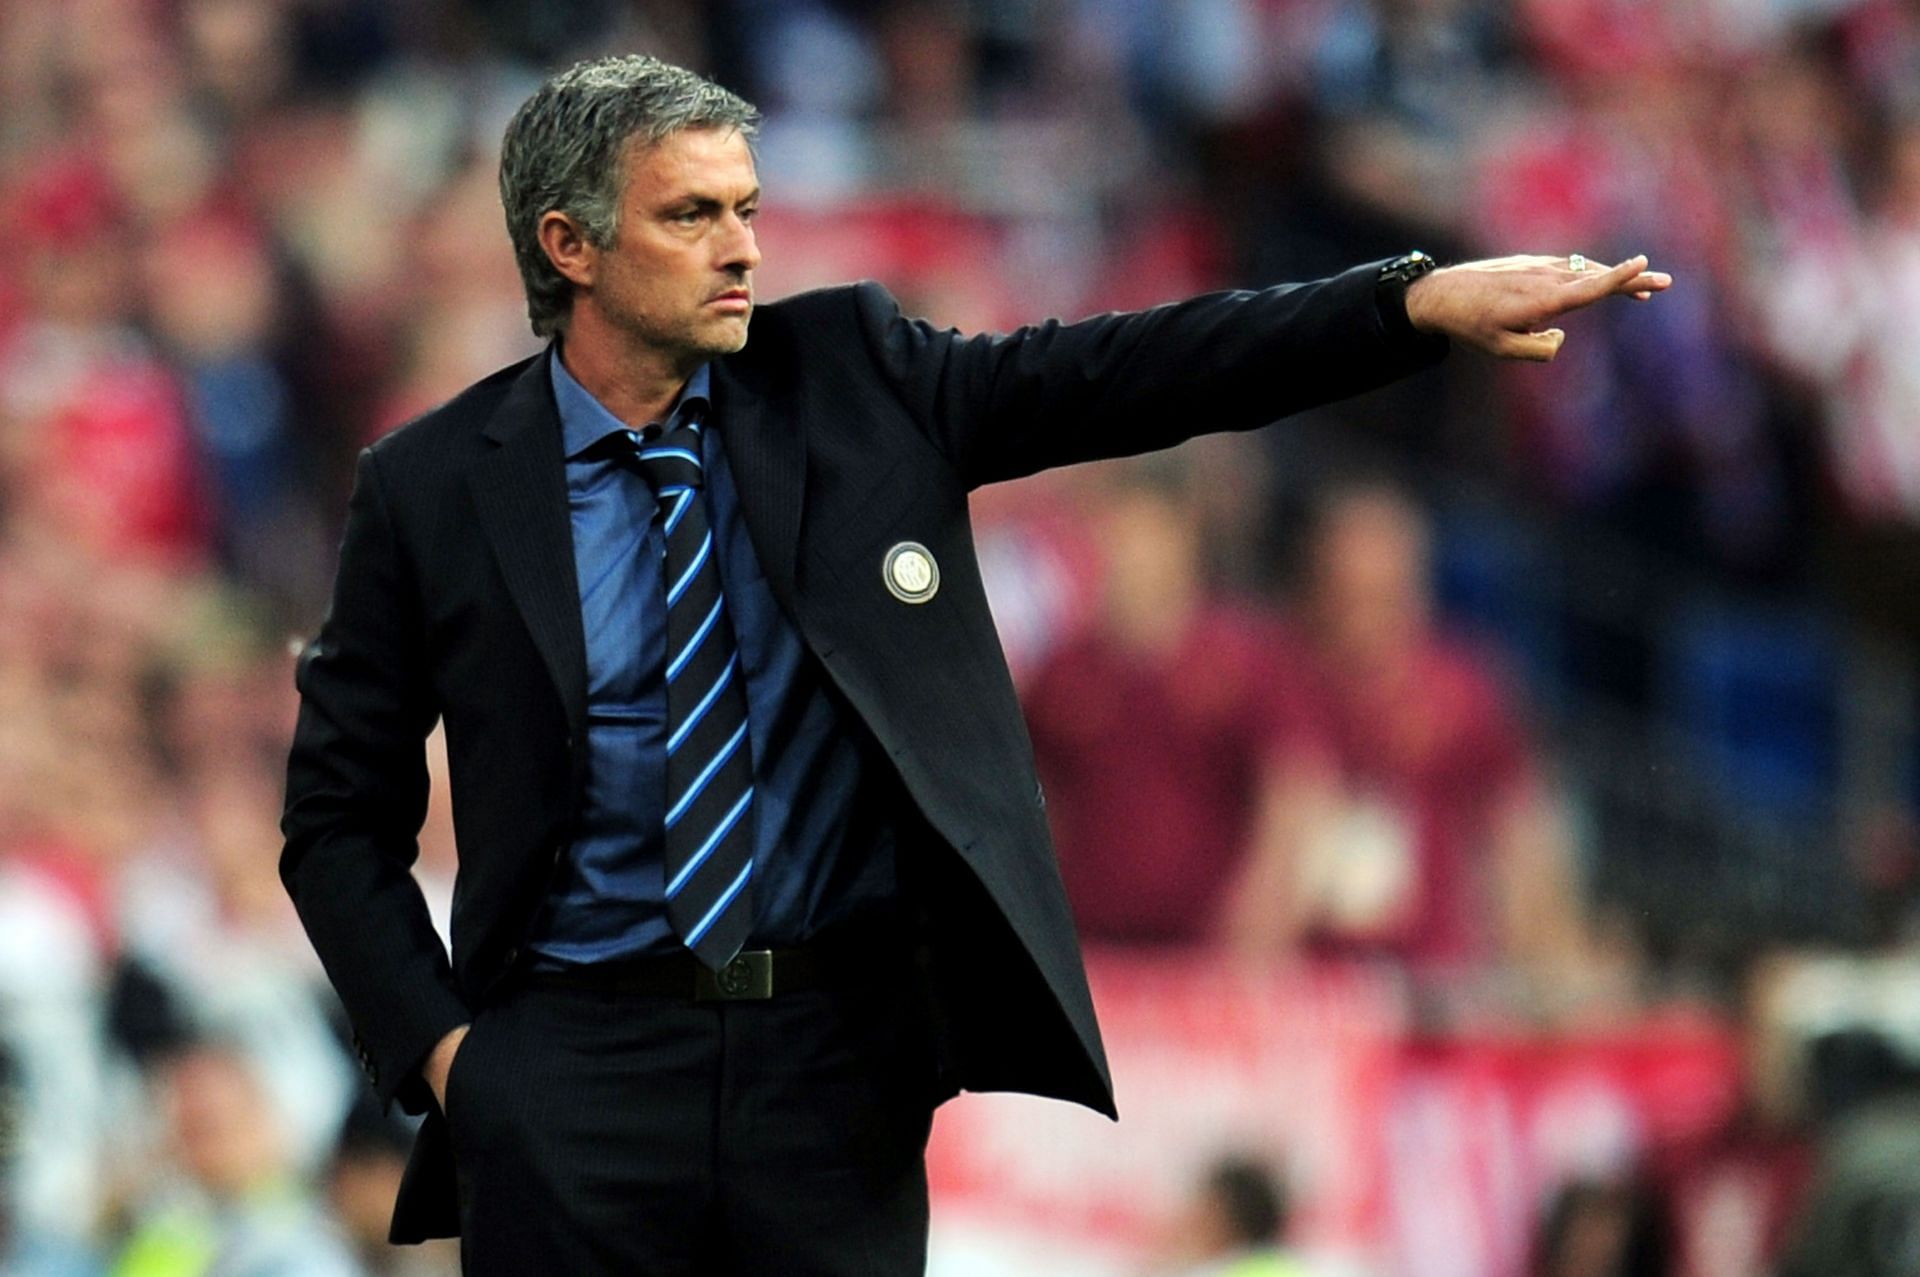 Internazionale became UEFA Champions League winners under Jose Mourinho in 2010